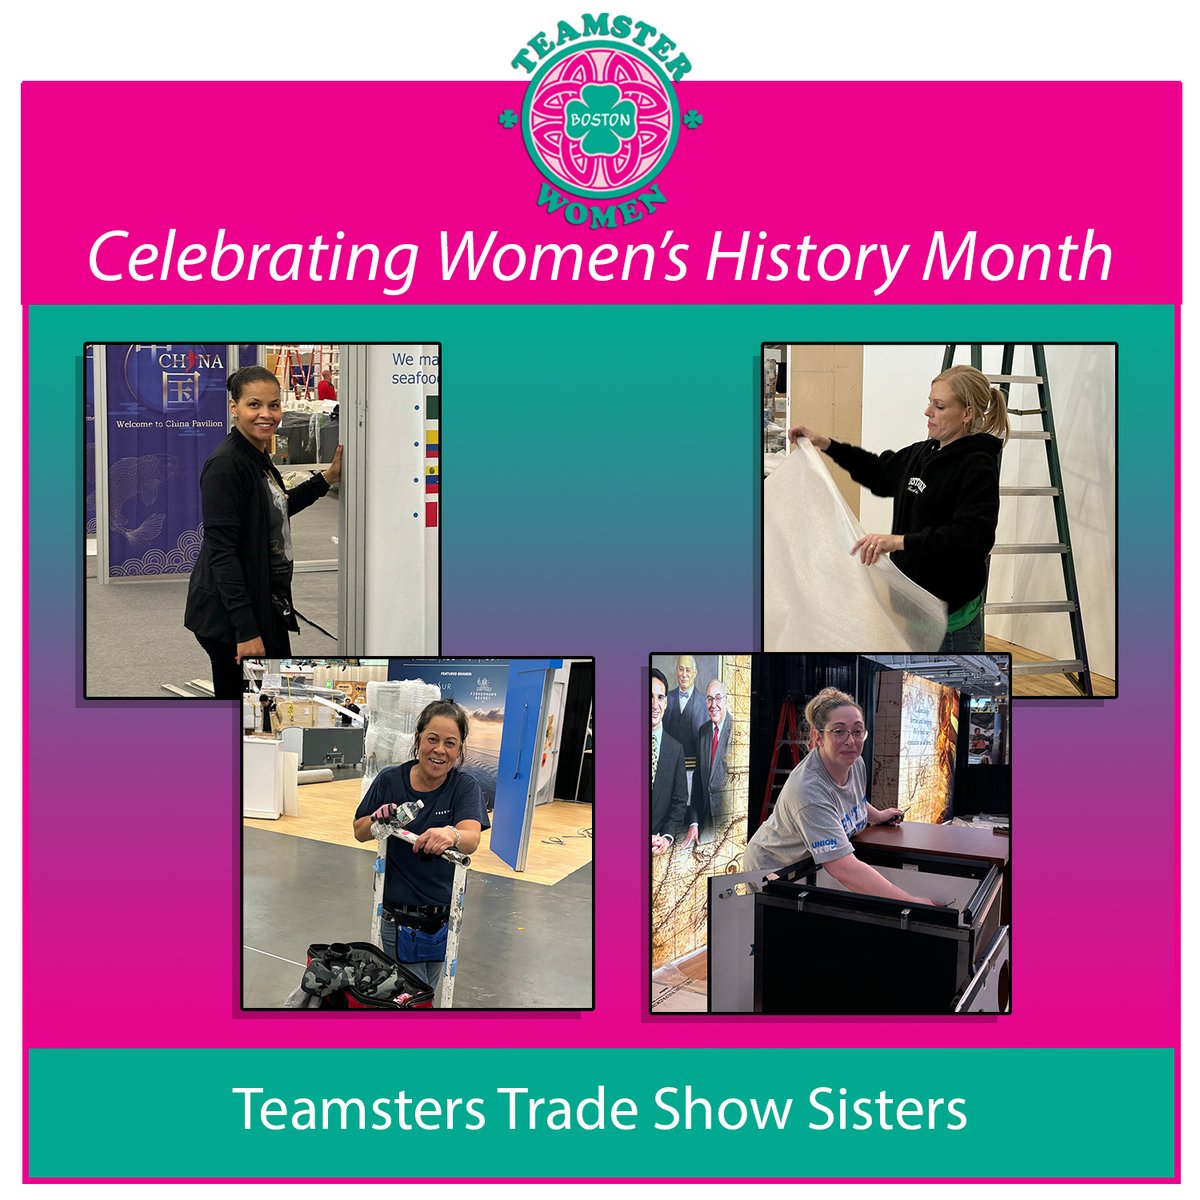 Teamsters Local 25 Trade Show sisters help Boston shine! Hundreds of thousands of people visit Massachusetts every year from across the globe to attend trade shows and conventions, and the set-up is done by Teamsters - many of them women. #teamsterslocal25 #teamsters #bostonma